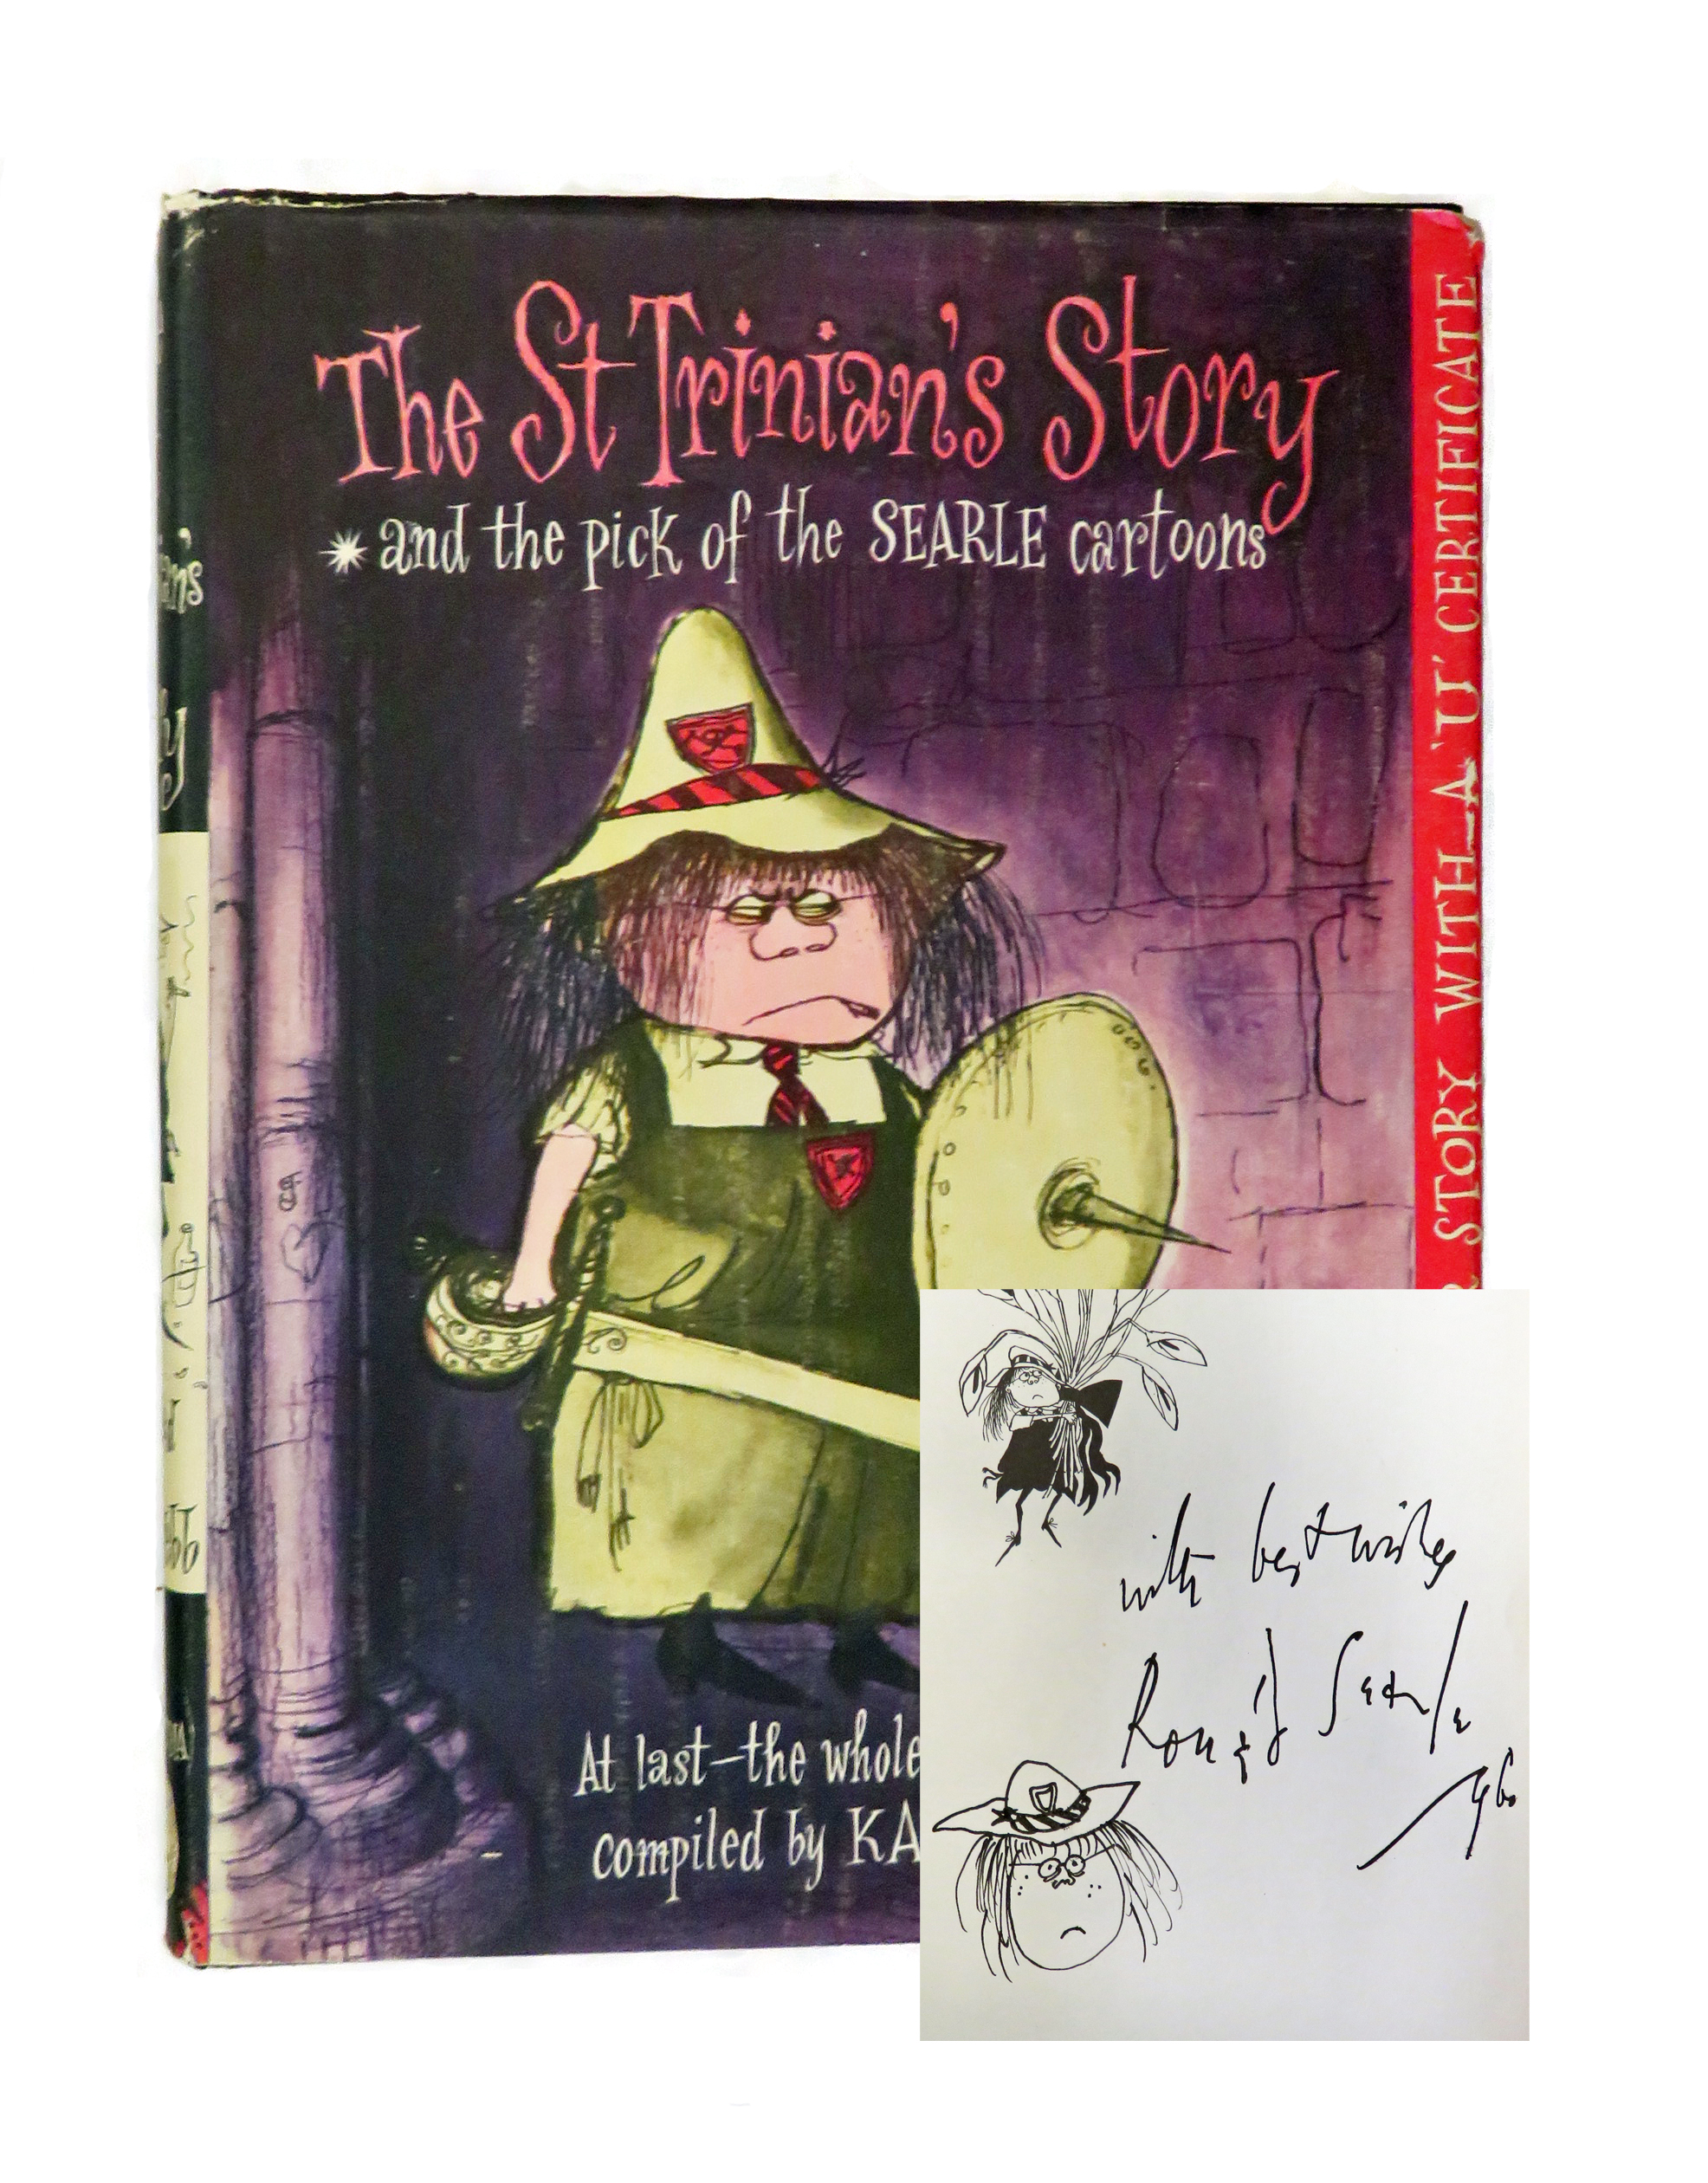 The St Trinian's Story with Original Sketch by Ronald Searle